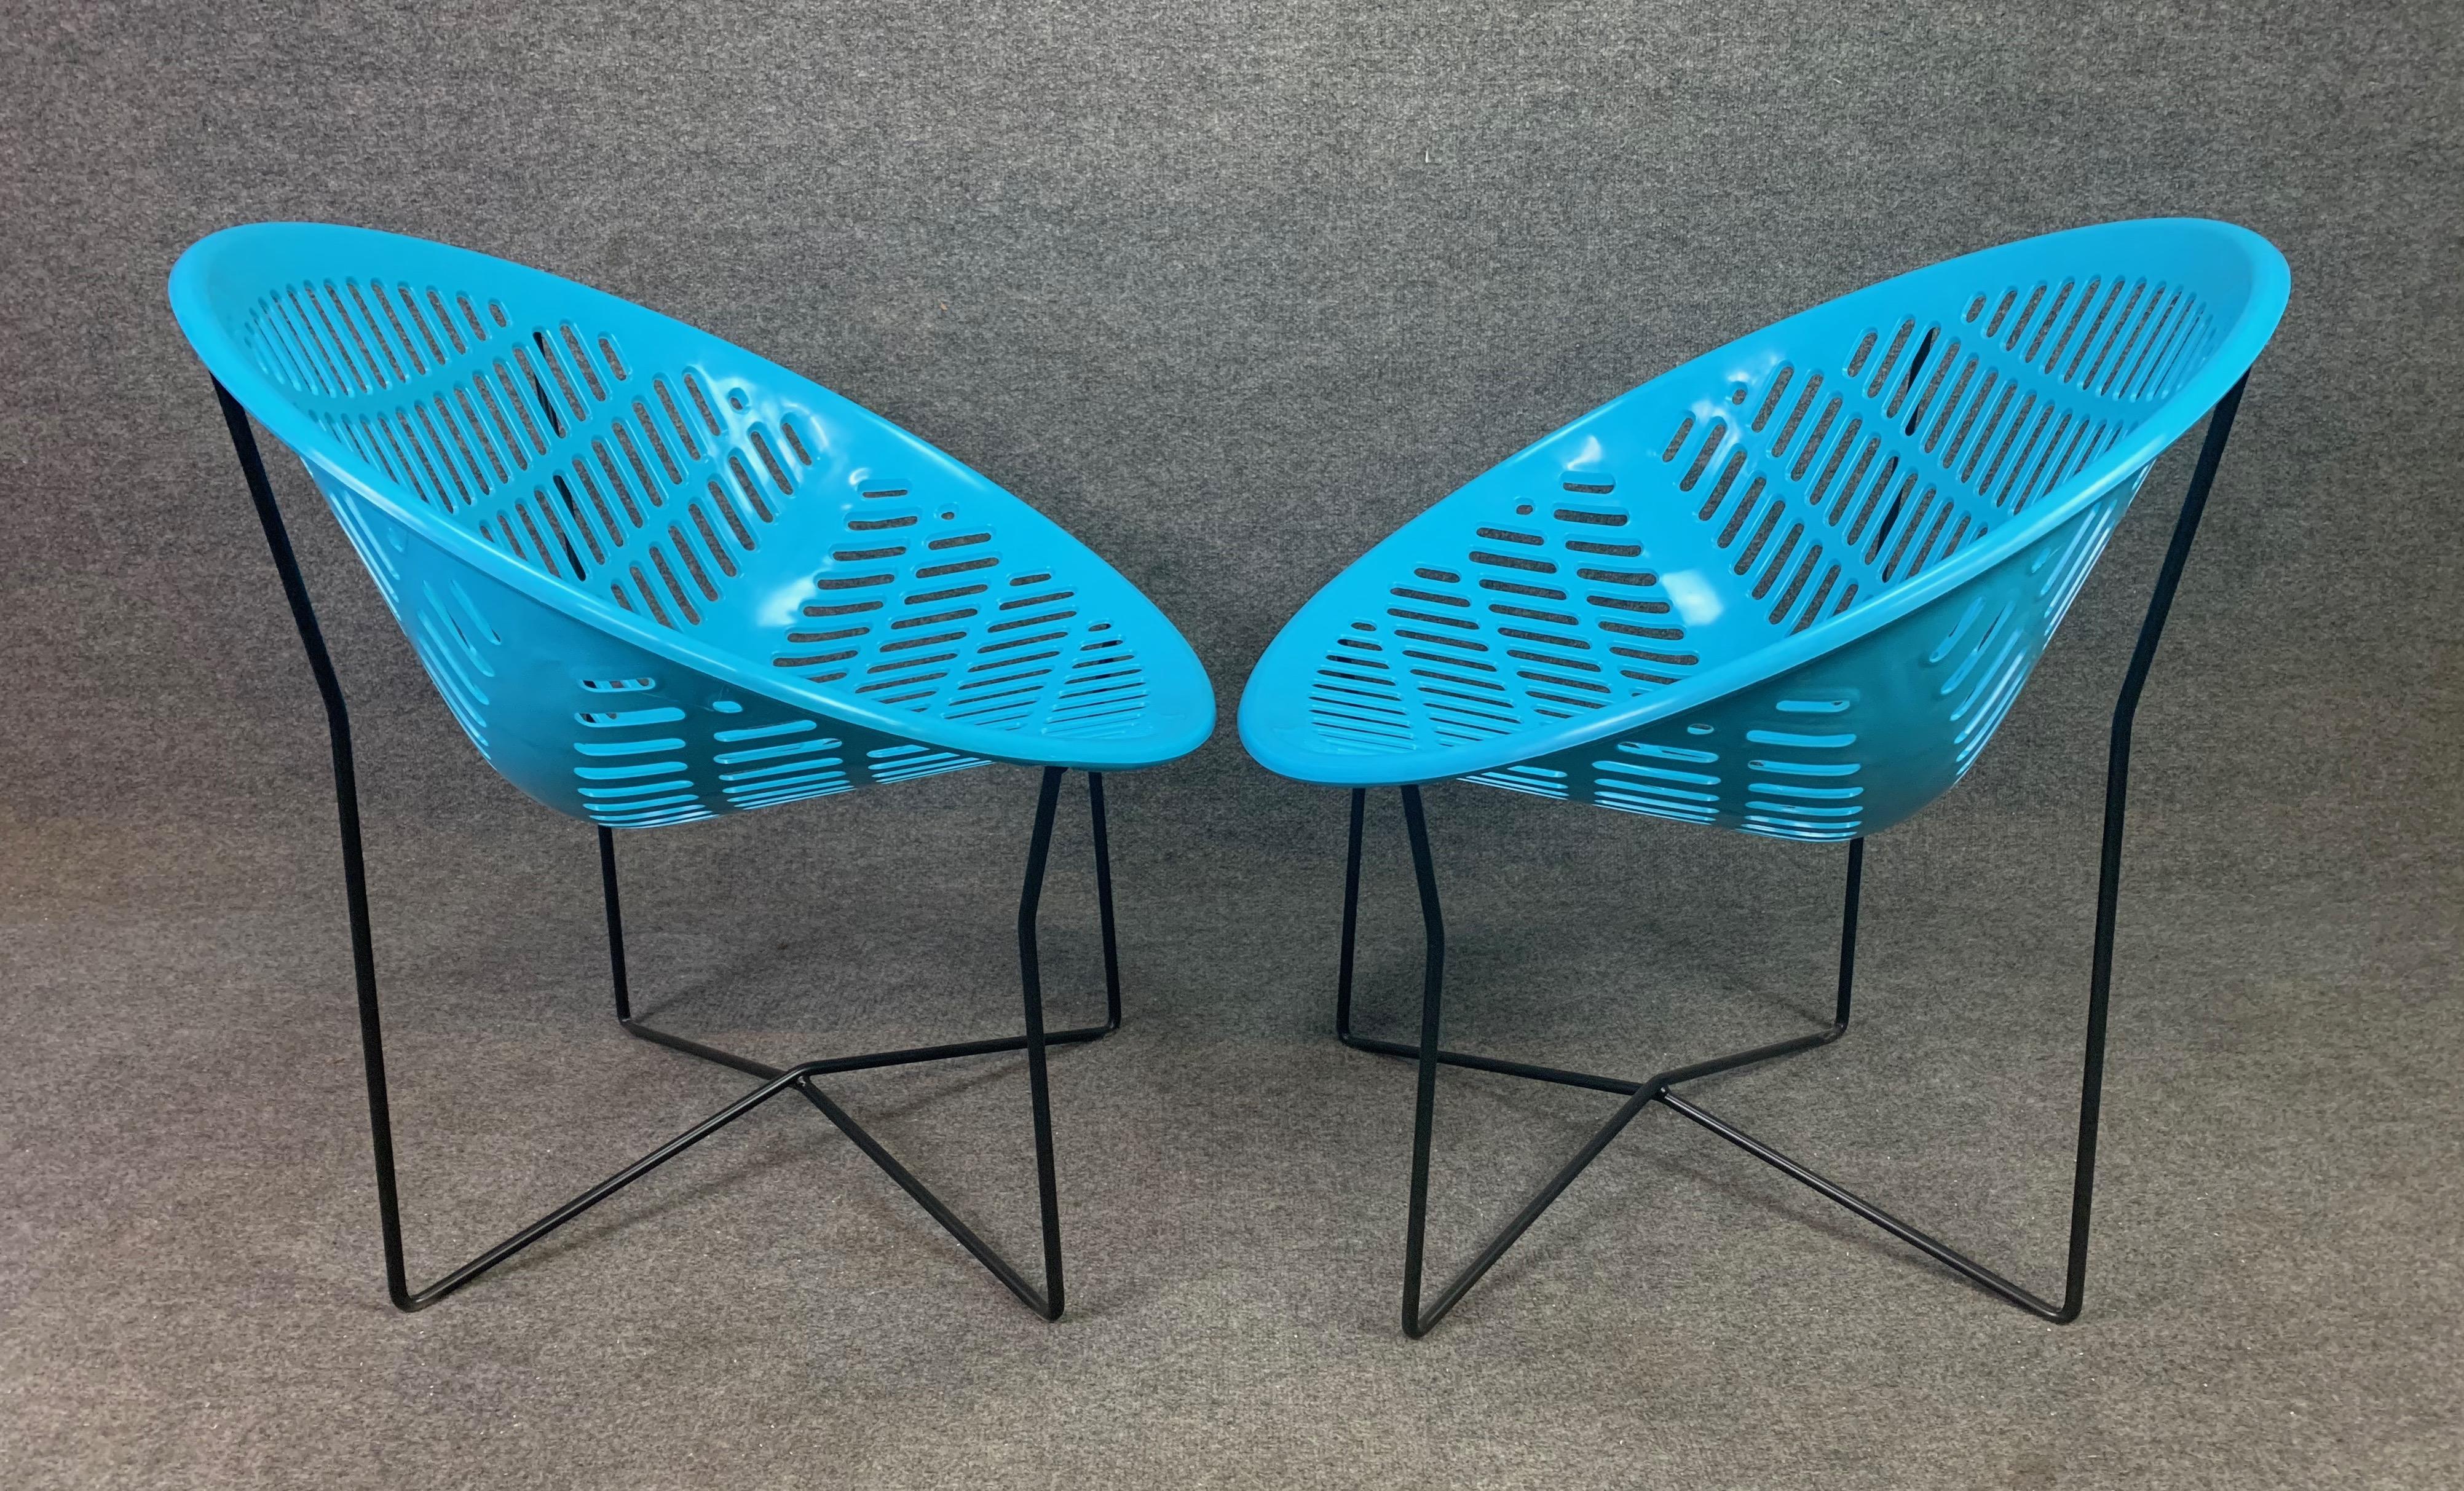 Here is a pair of vintage and iconic patio furniture; the 